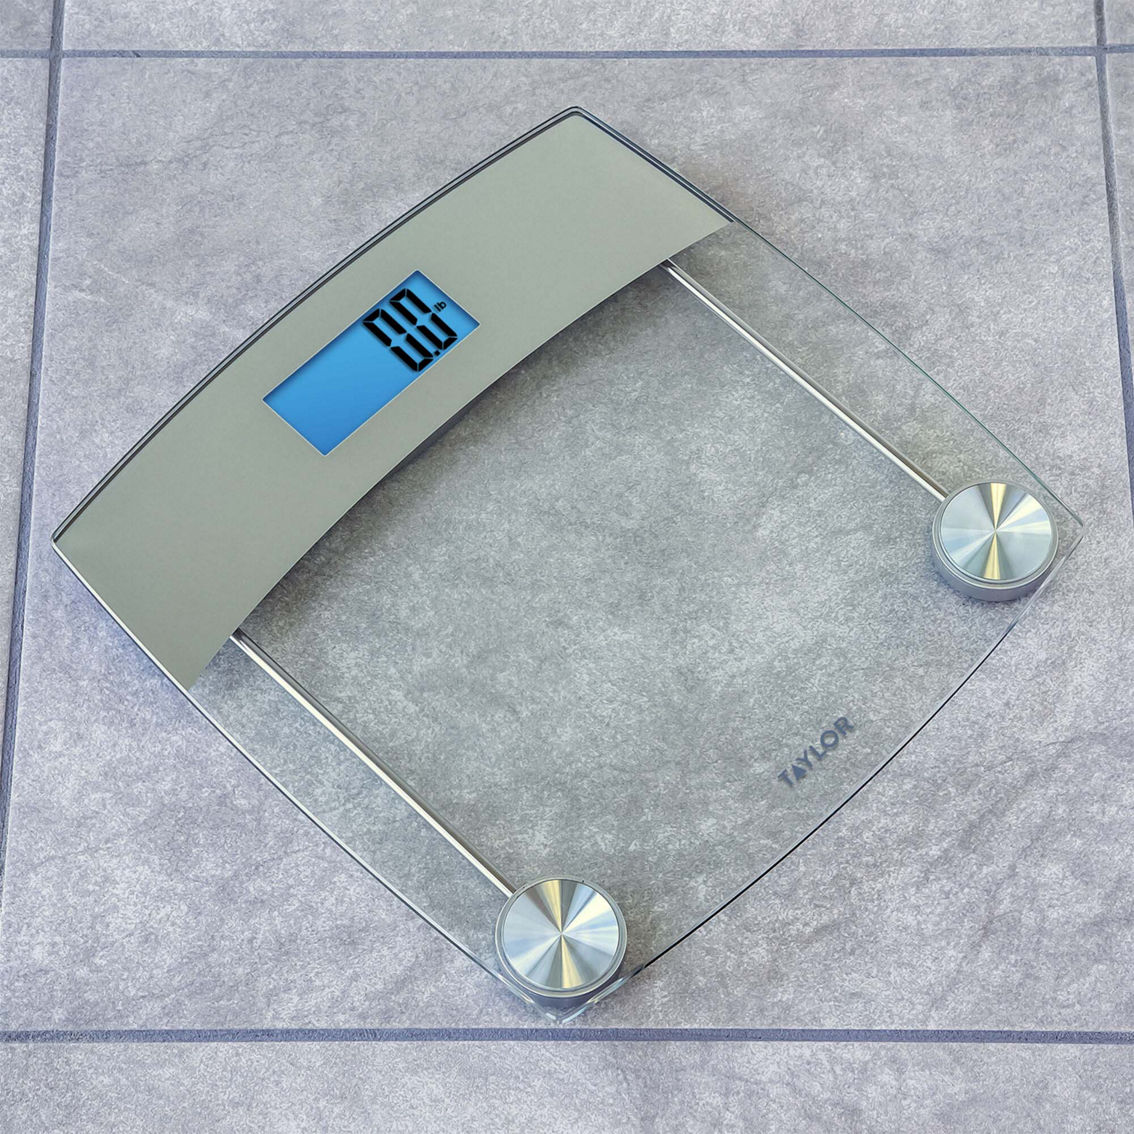 Taylor Digital Glass Bathroom Scale with Stainless Steel Accents - Image 3 of 4